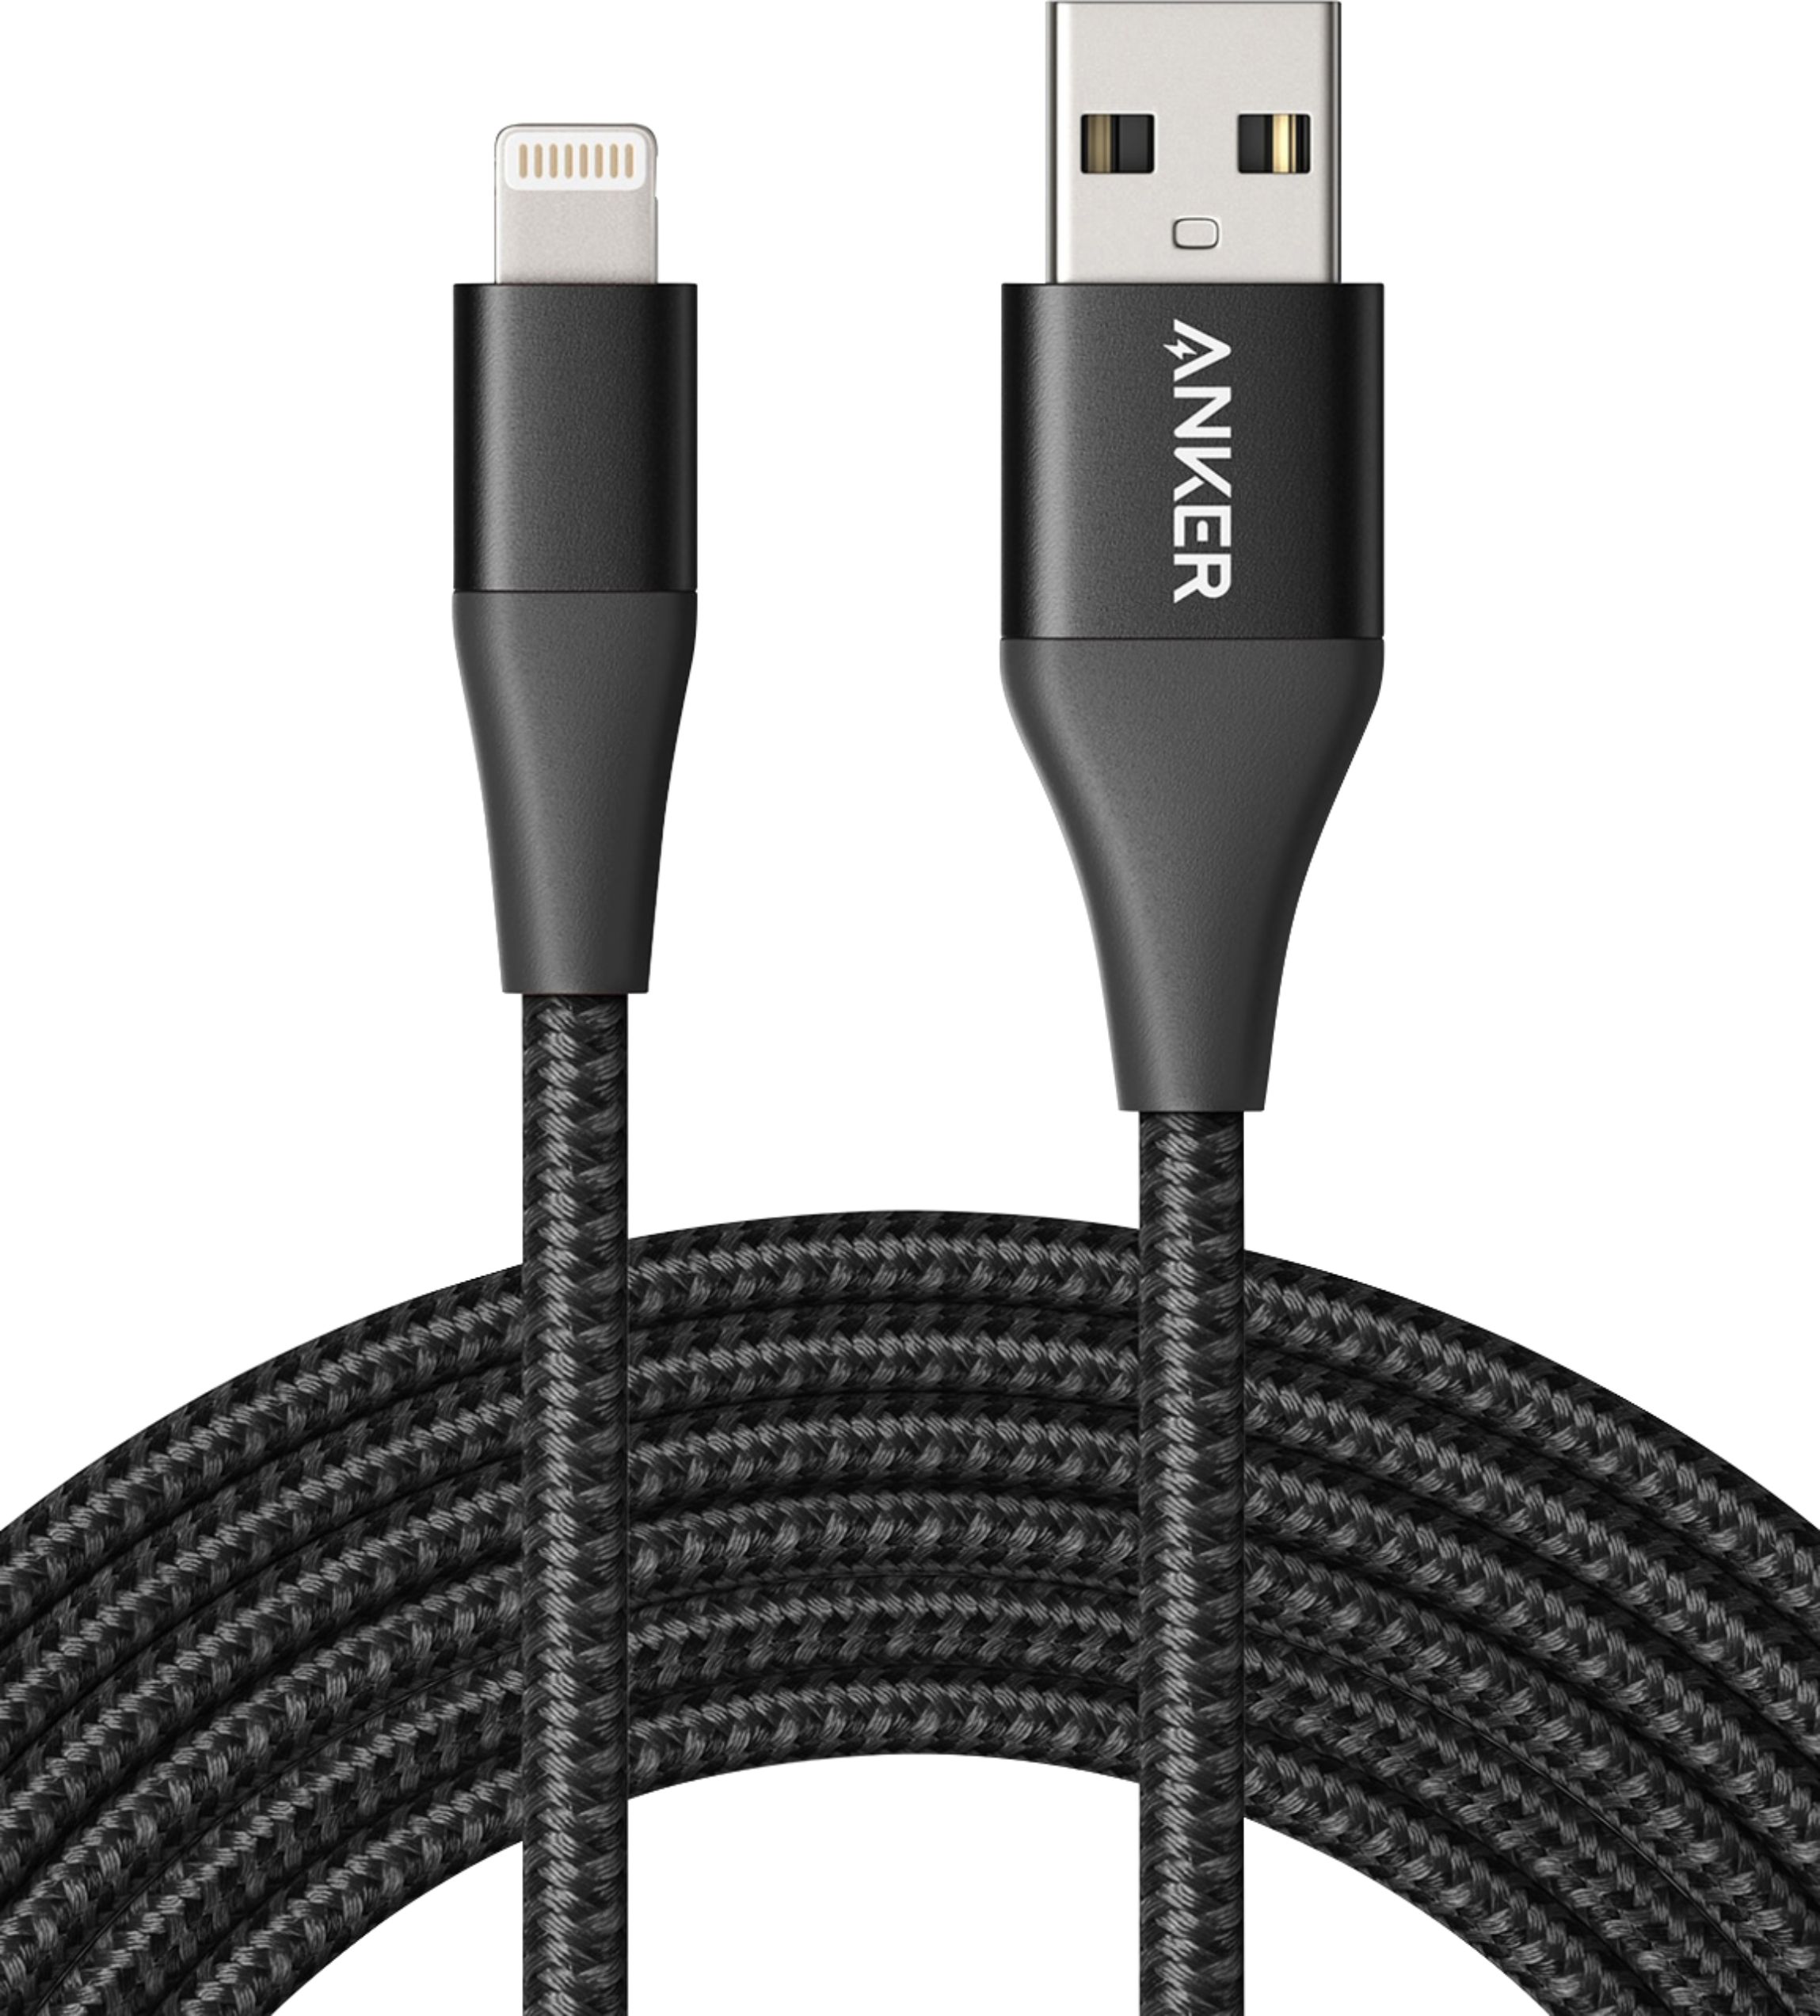 Anker - Powerline+ II USB-A to Lightning Cable 6-ft - Black